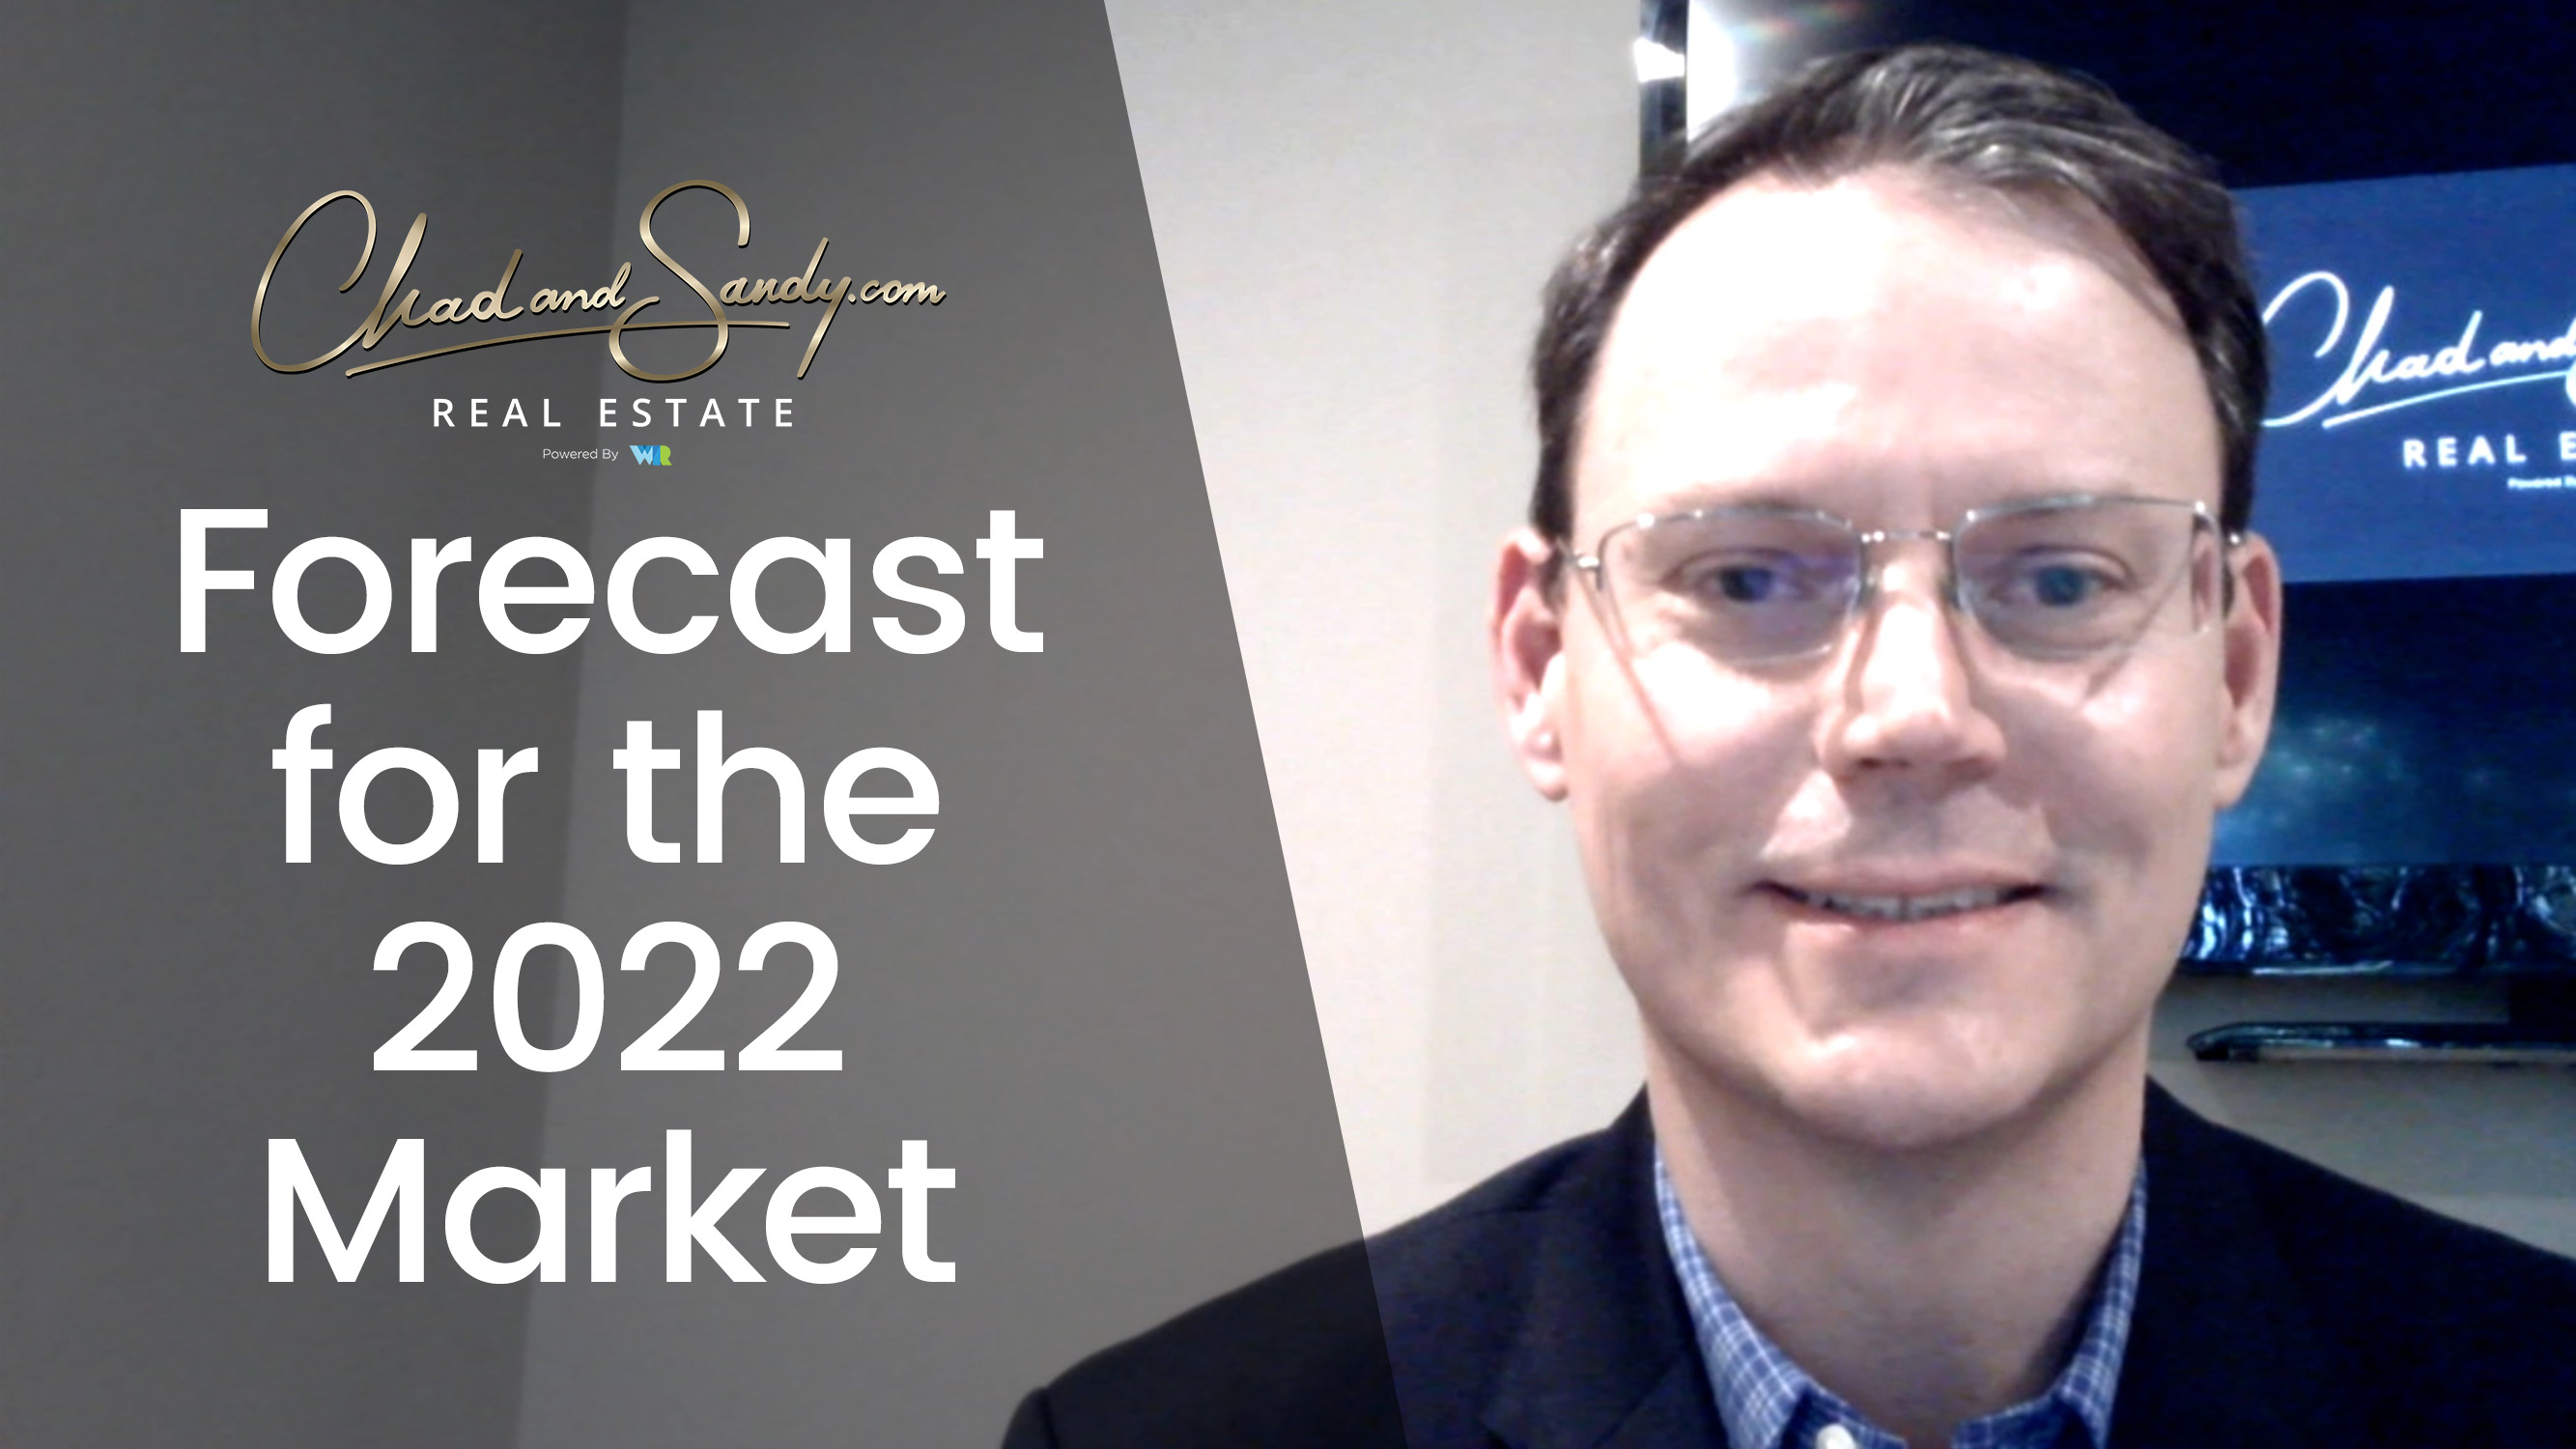 A Look Ahead to This Year’s Market